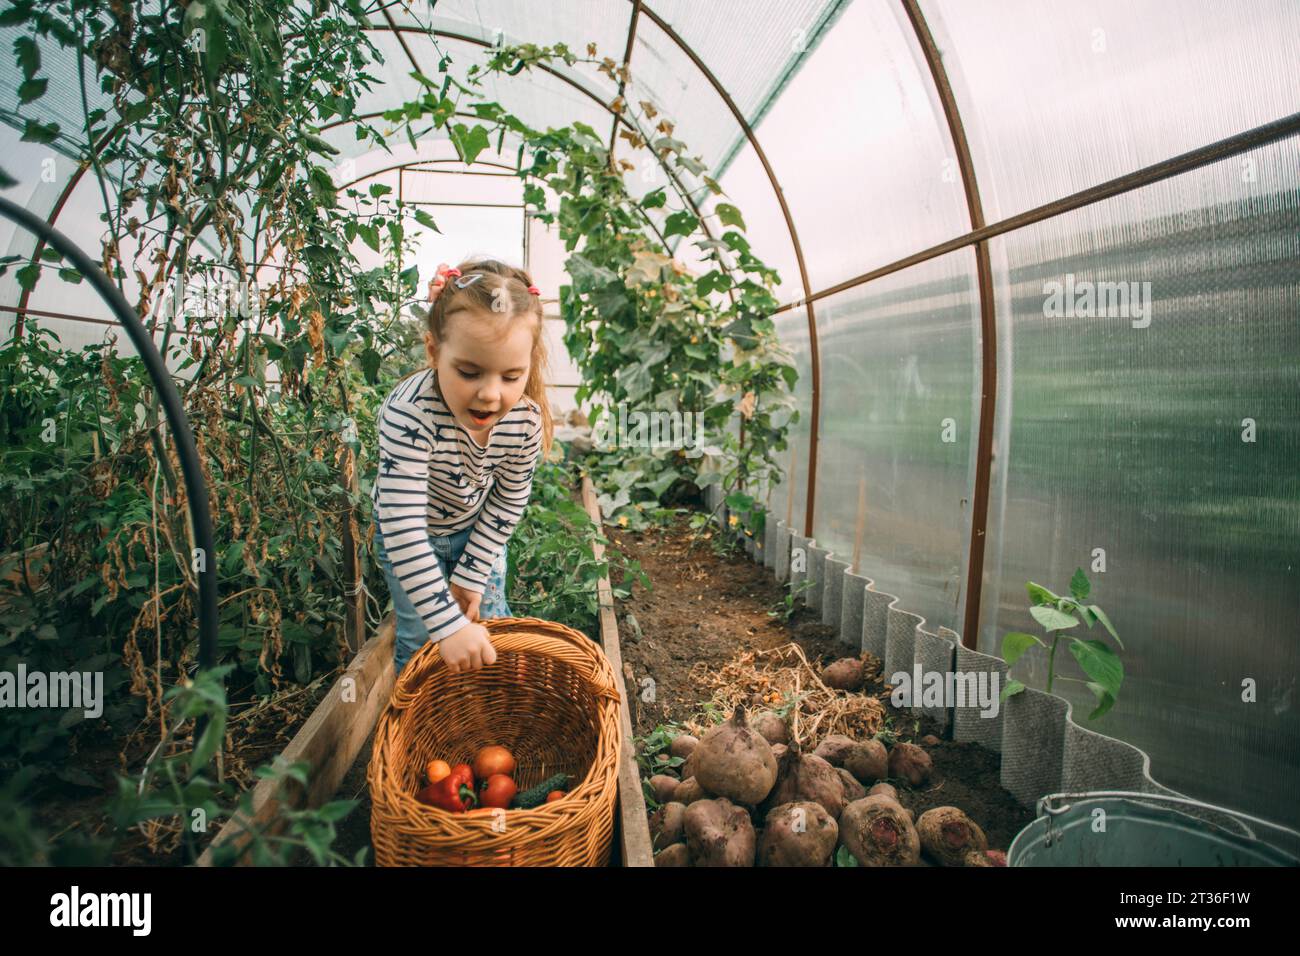 Blond girl harvesting tomatoes and red bell peppers at greenhouse Stock Photo